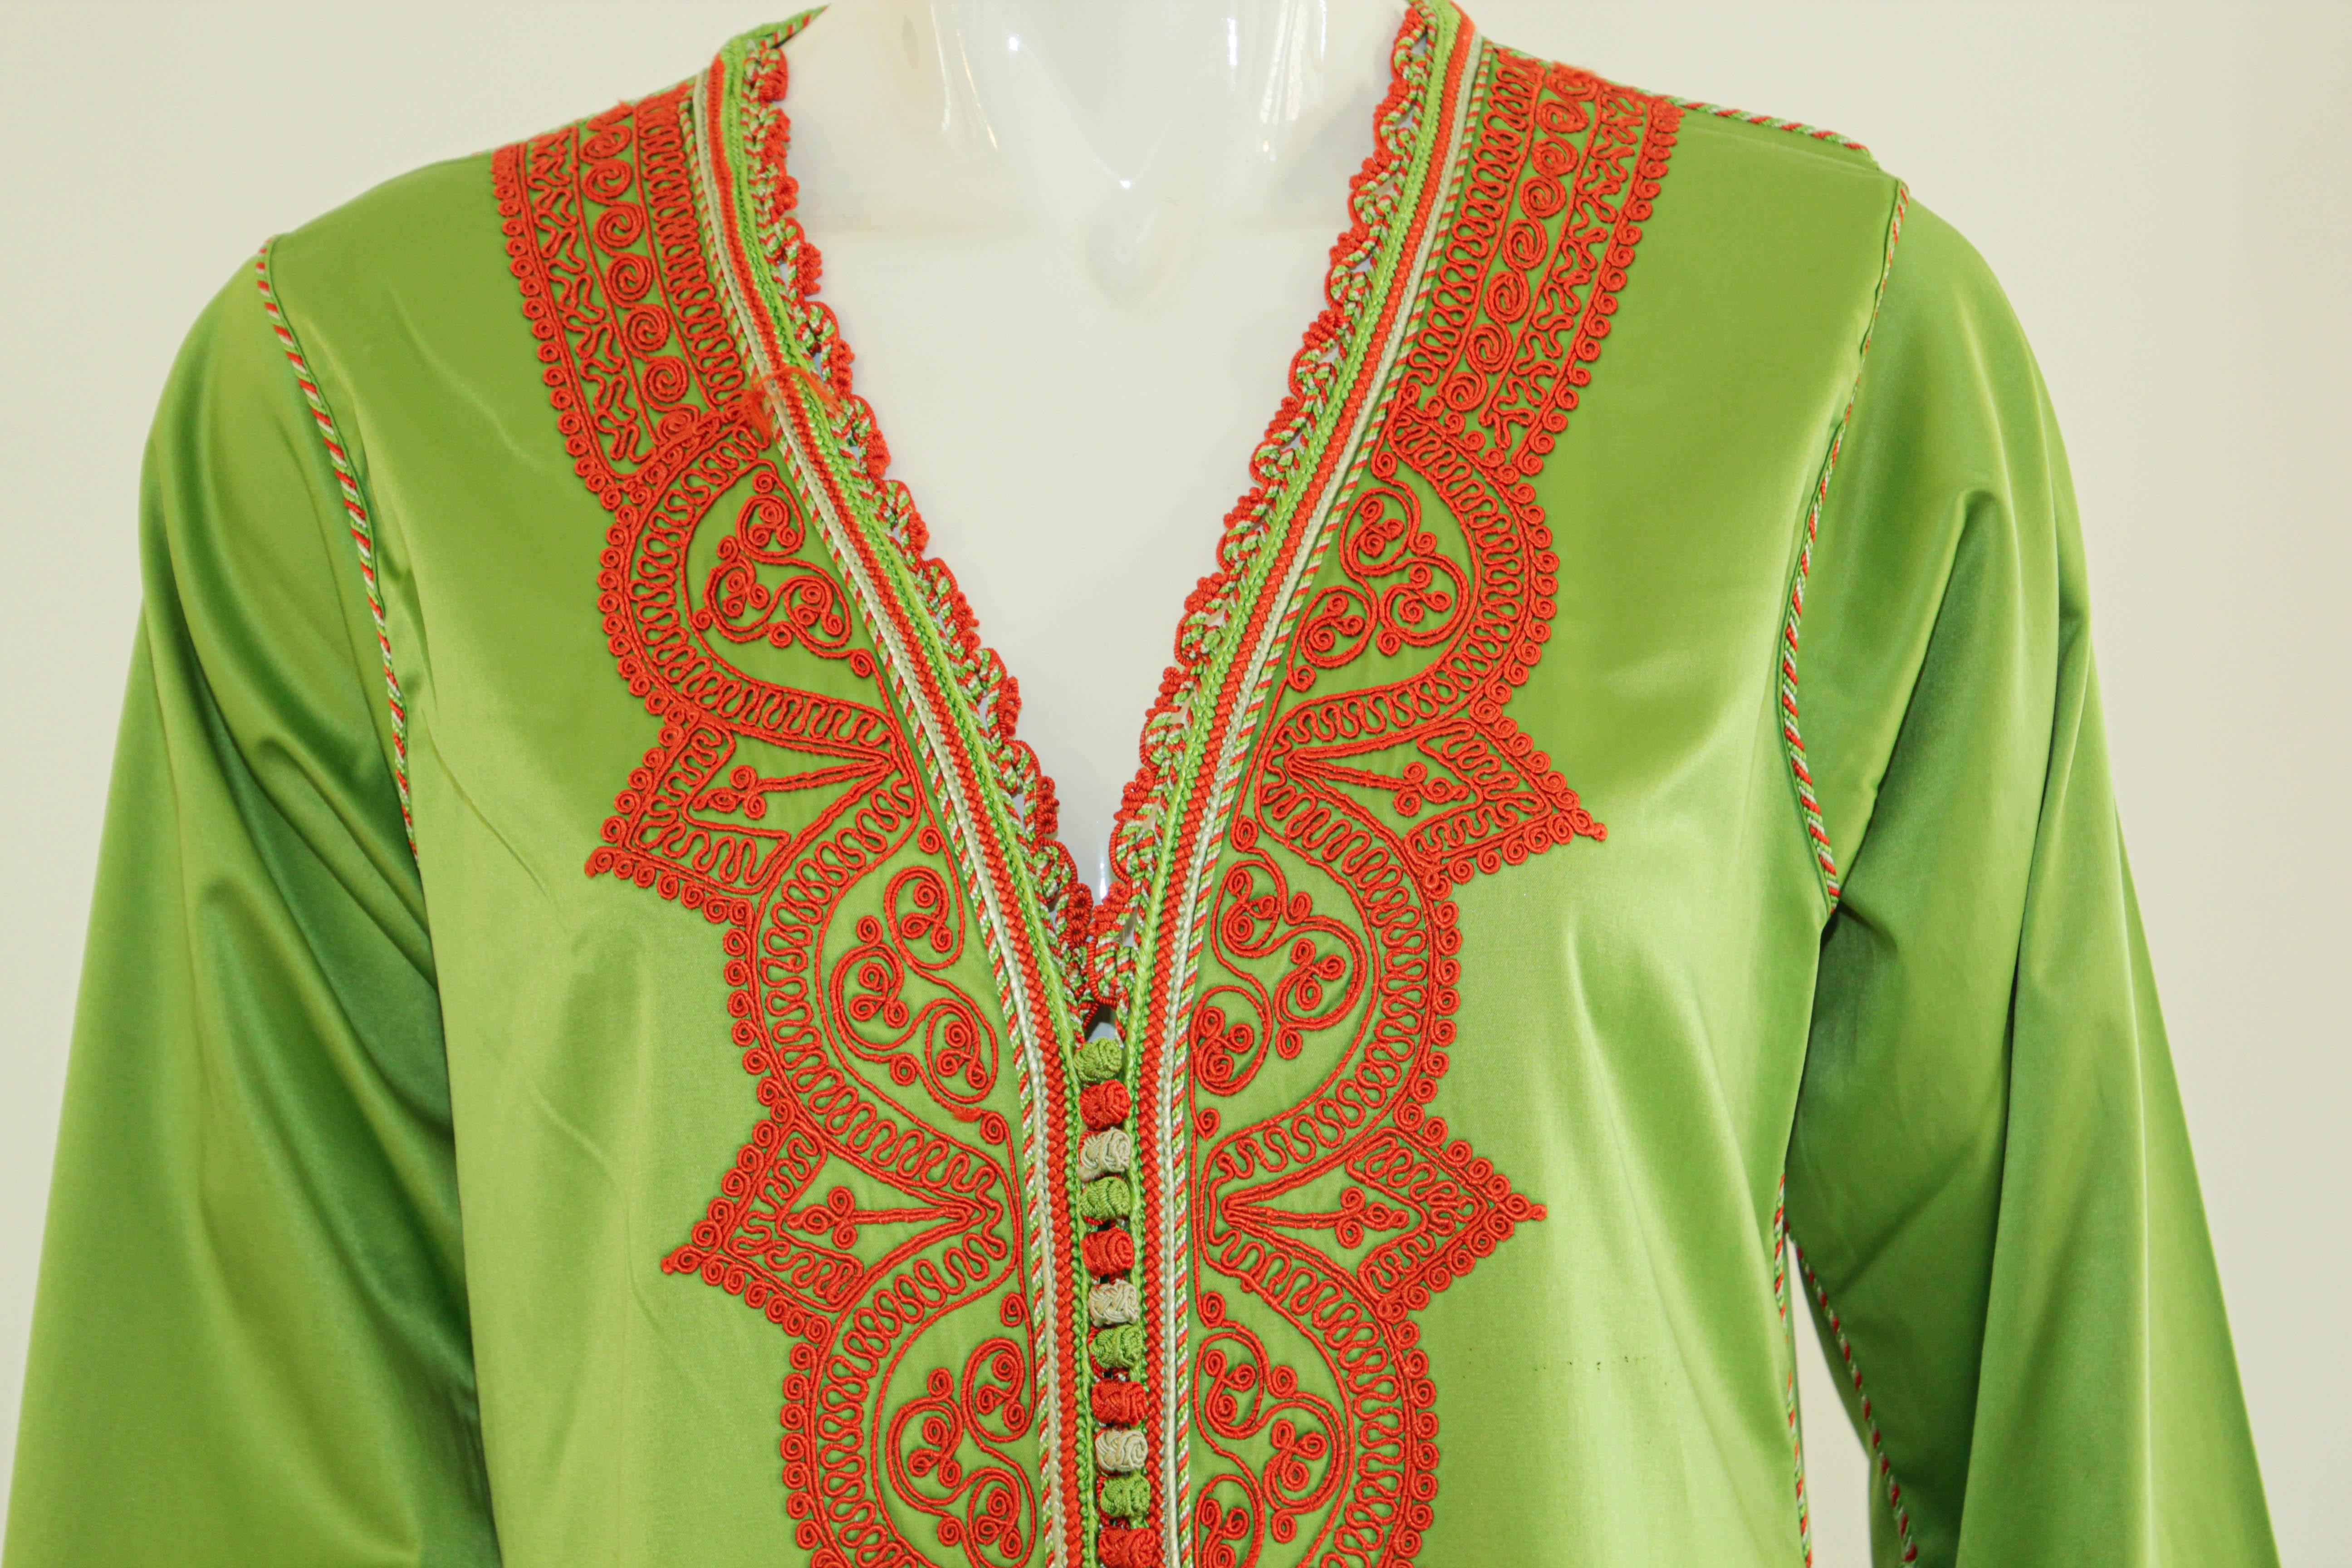 green and orange traditional dresses